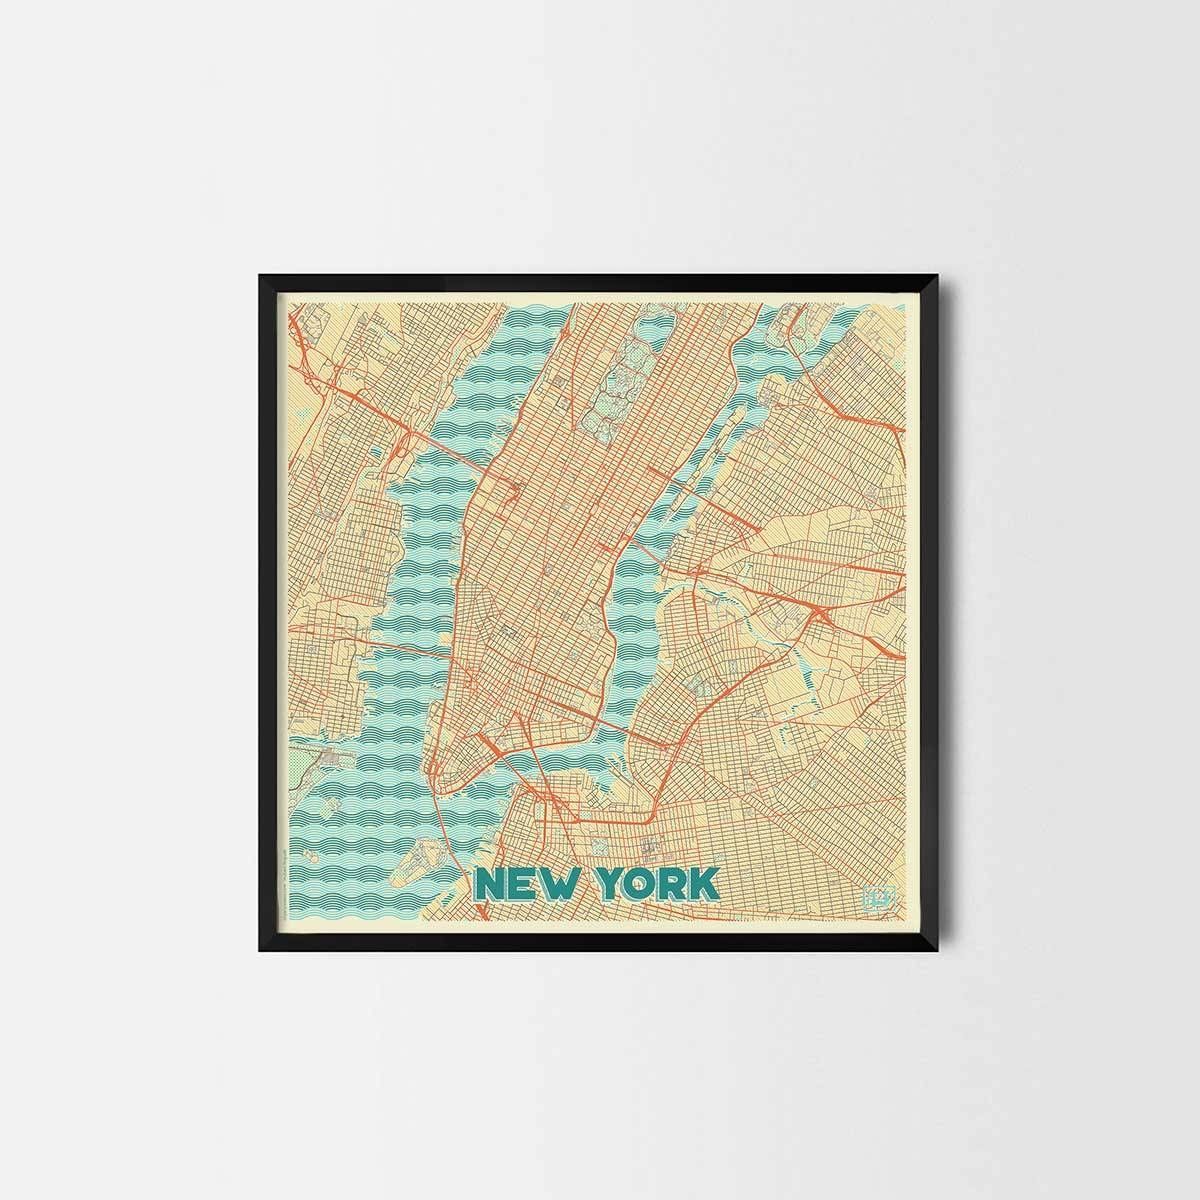 City Art Posters | Map Posters And Art Prints – Gifts For City Regarding Latest City Prints Map Wall Art (Gallery 1 of 20)